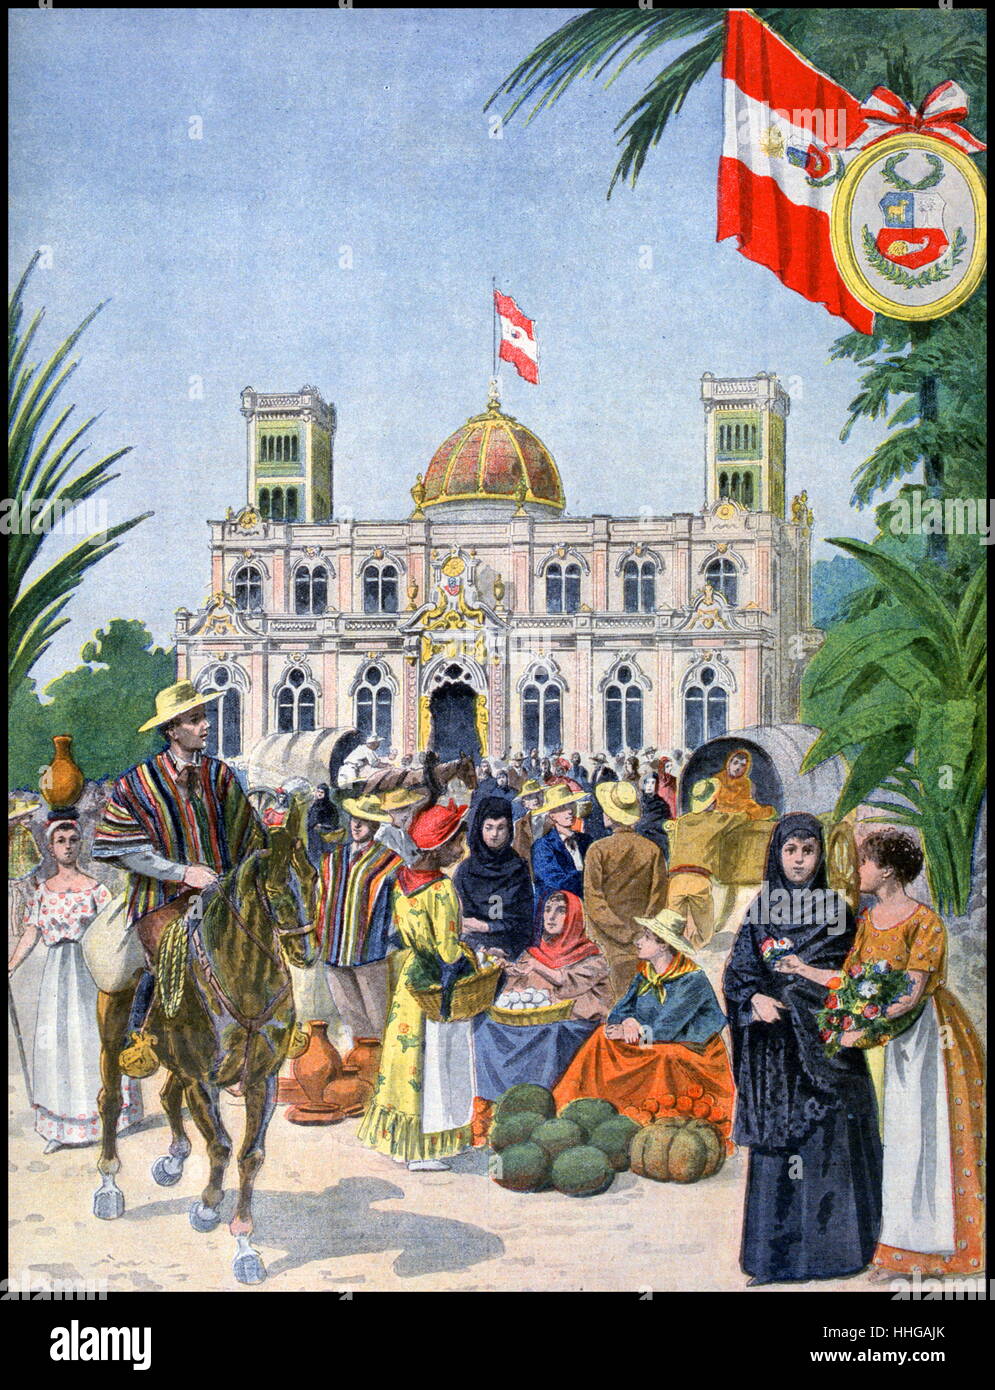 Illustration showing the Peruvian Pavilion, at the Exposition Universelle of 1900. The inset photograph shows King Leopold. This was a fair held in Paris, France, from 14 April to 12 November 1900, to celebrate the achievements of the past century and to accelerate development into the next. Stock Photo